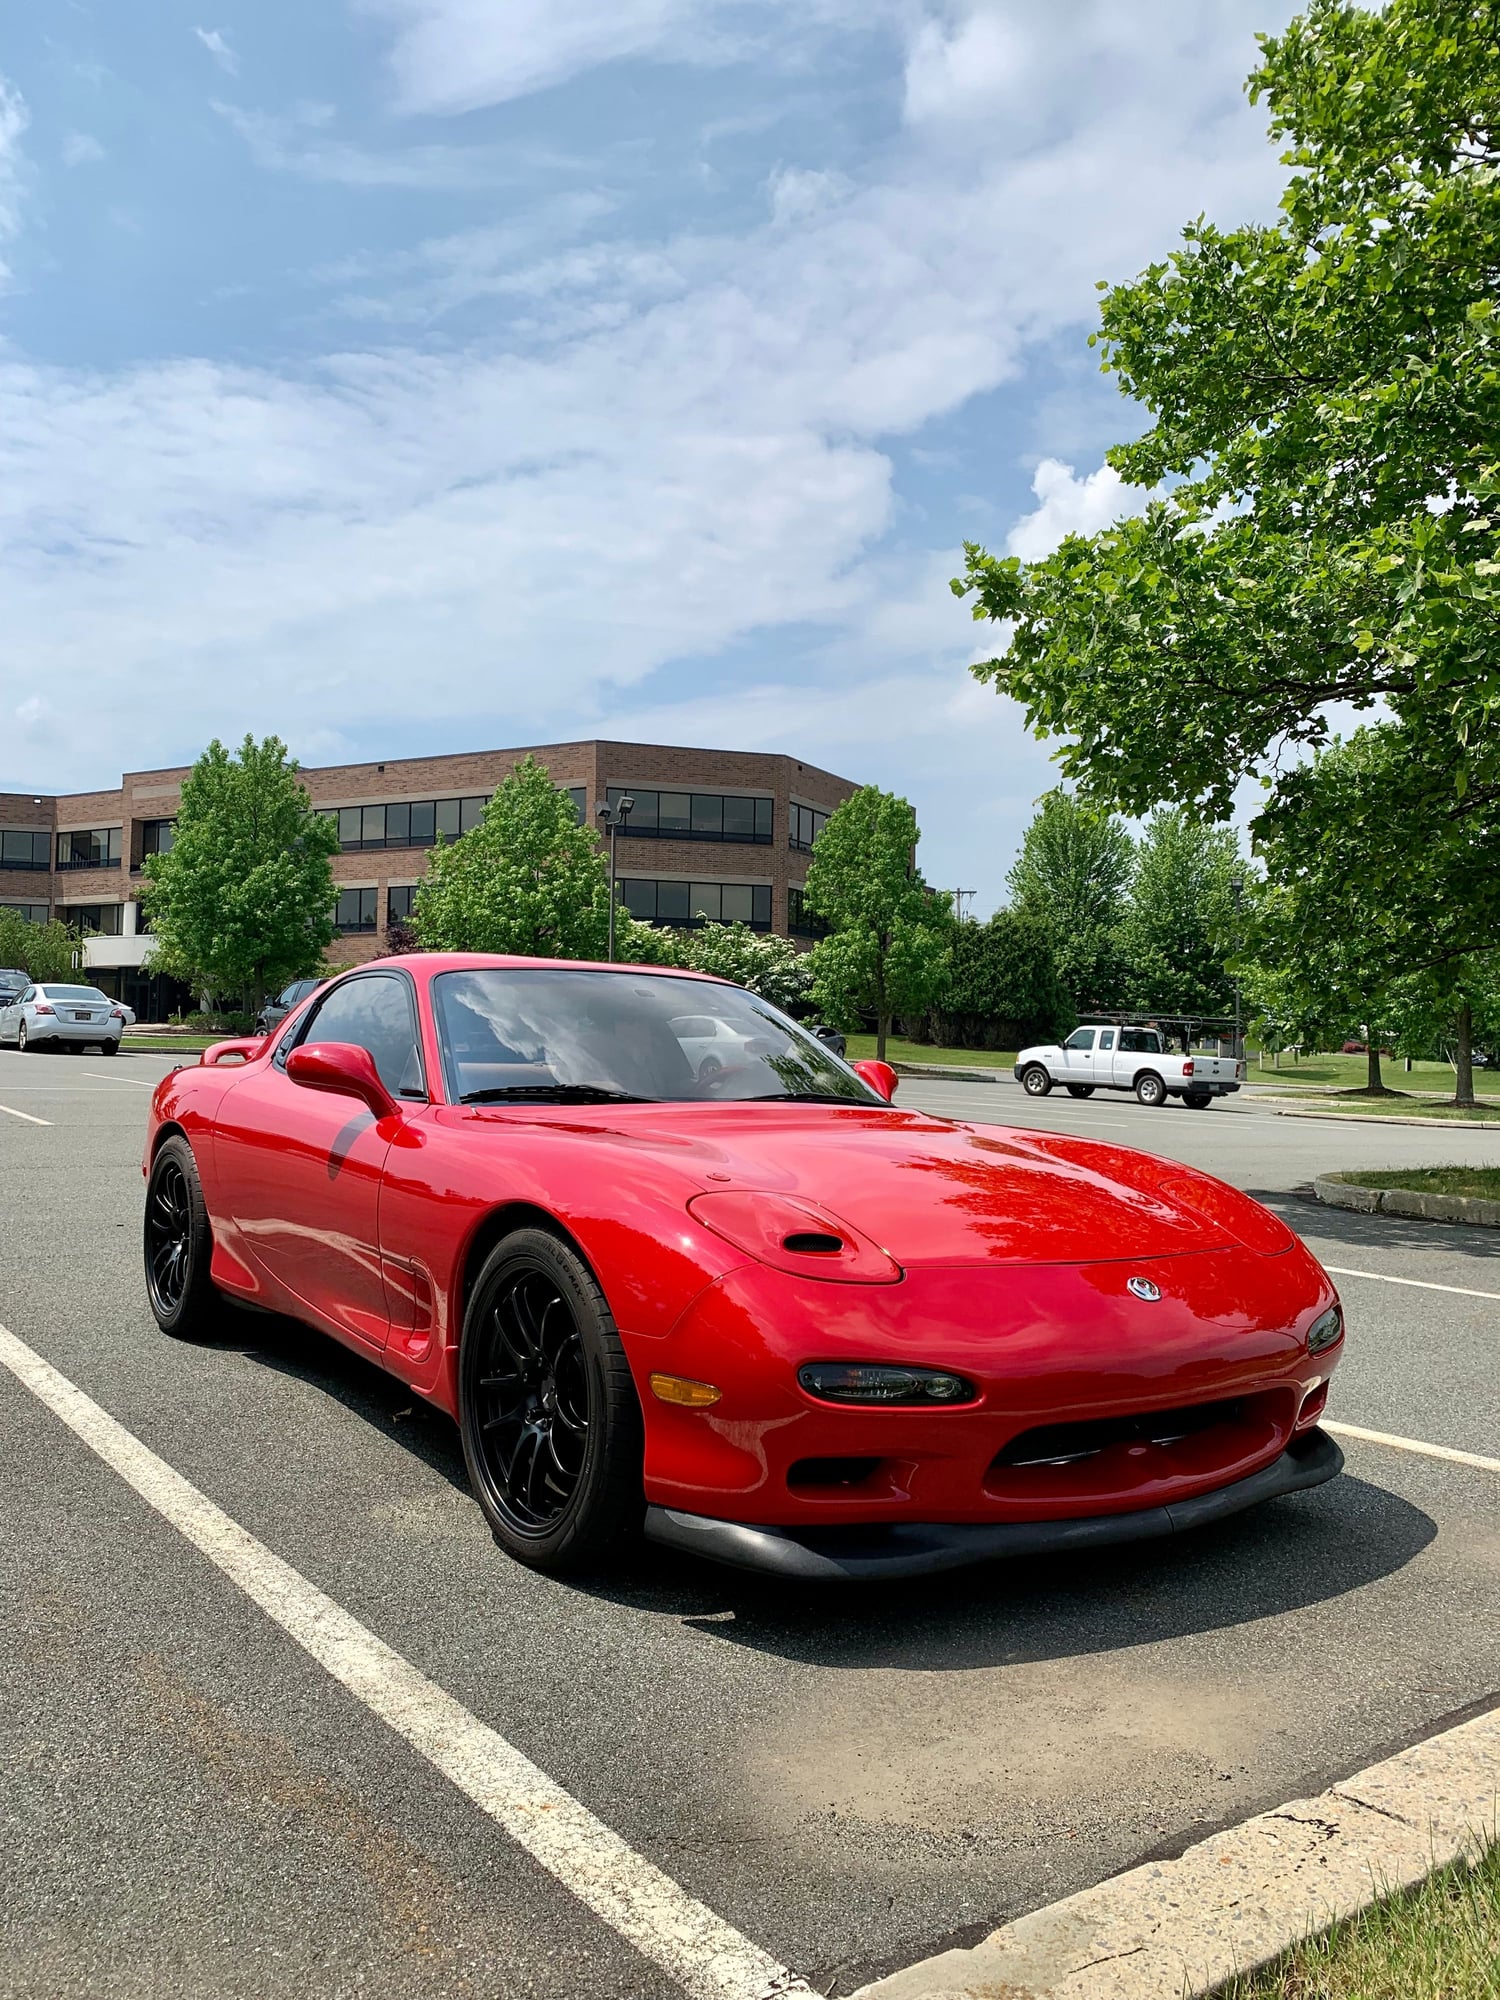 1993 Mazda RX-7 - *** 93 LHD Rx-7 Base w/ Leather, 5 speed, 52k miles, clean history *** - Used - VIN JM1FD3317P0209640 - 52,000 Miles - Other - 2WD - Manual - Coupe - Red - Allentown, PA 18031, United States